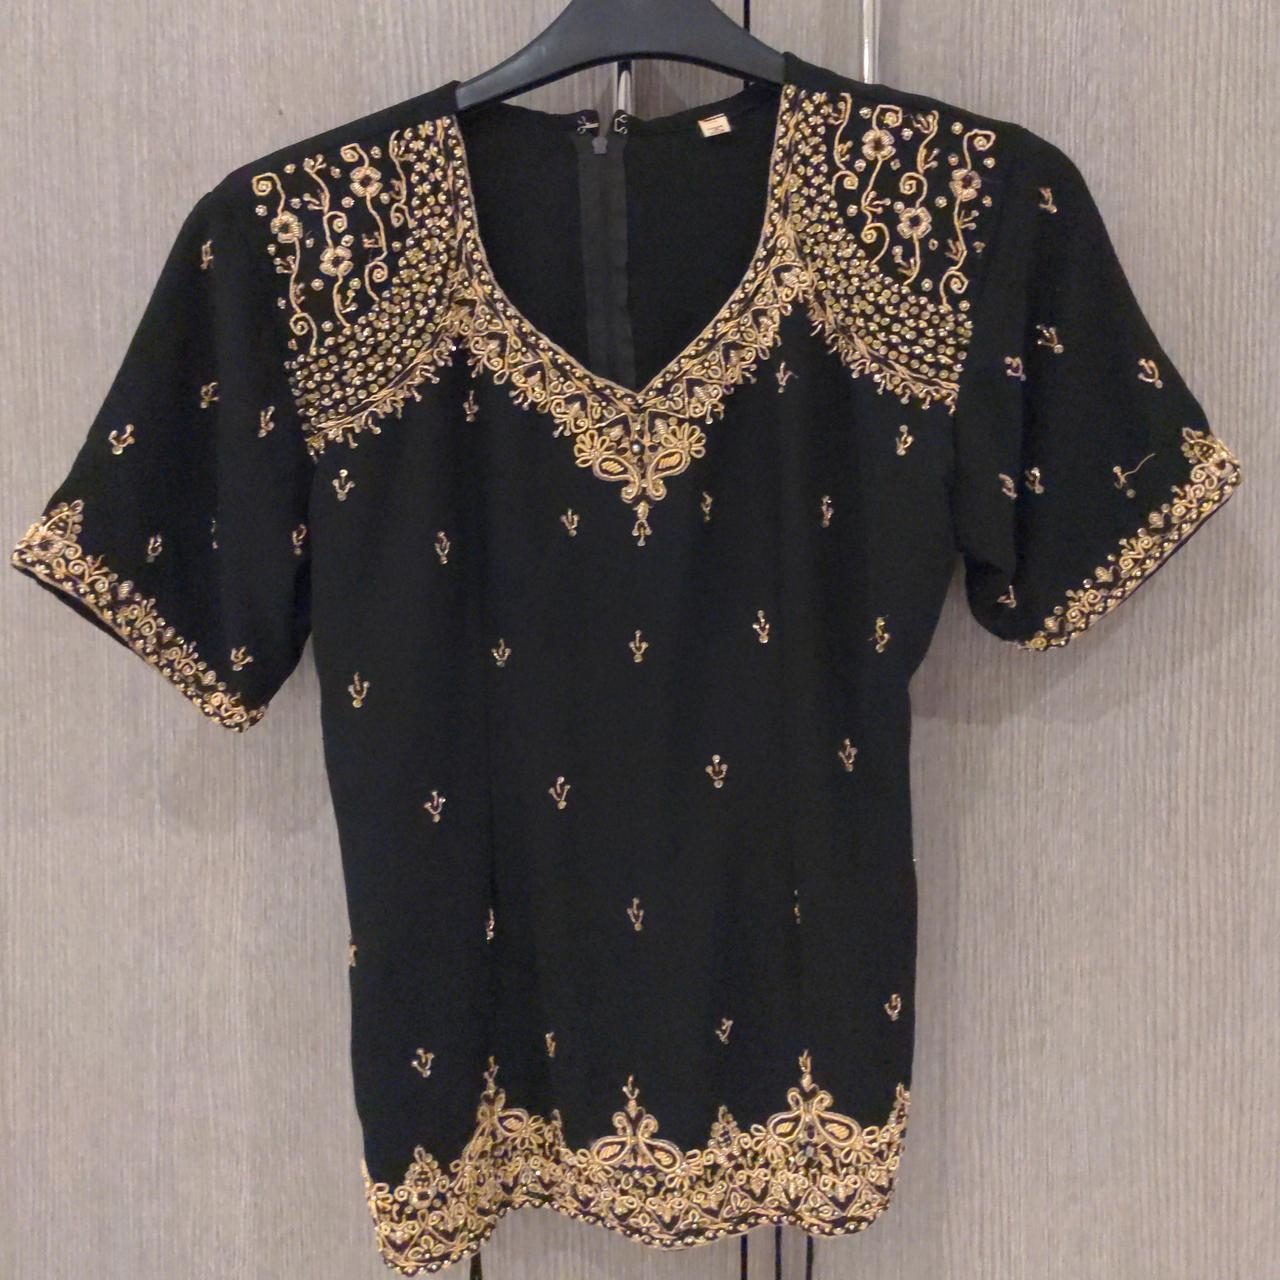 Women's Black and Gold Blouse | Depop